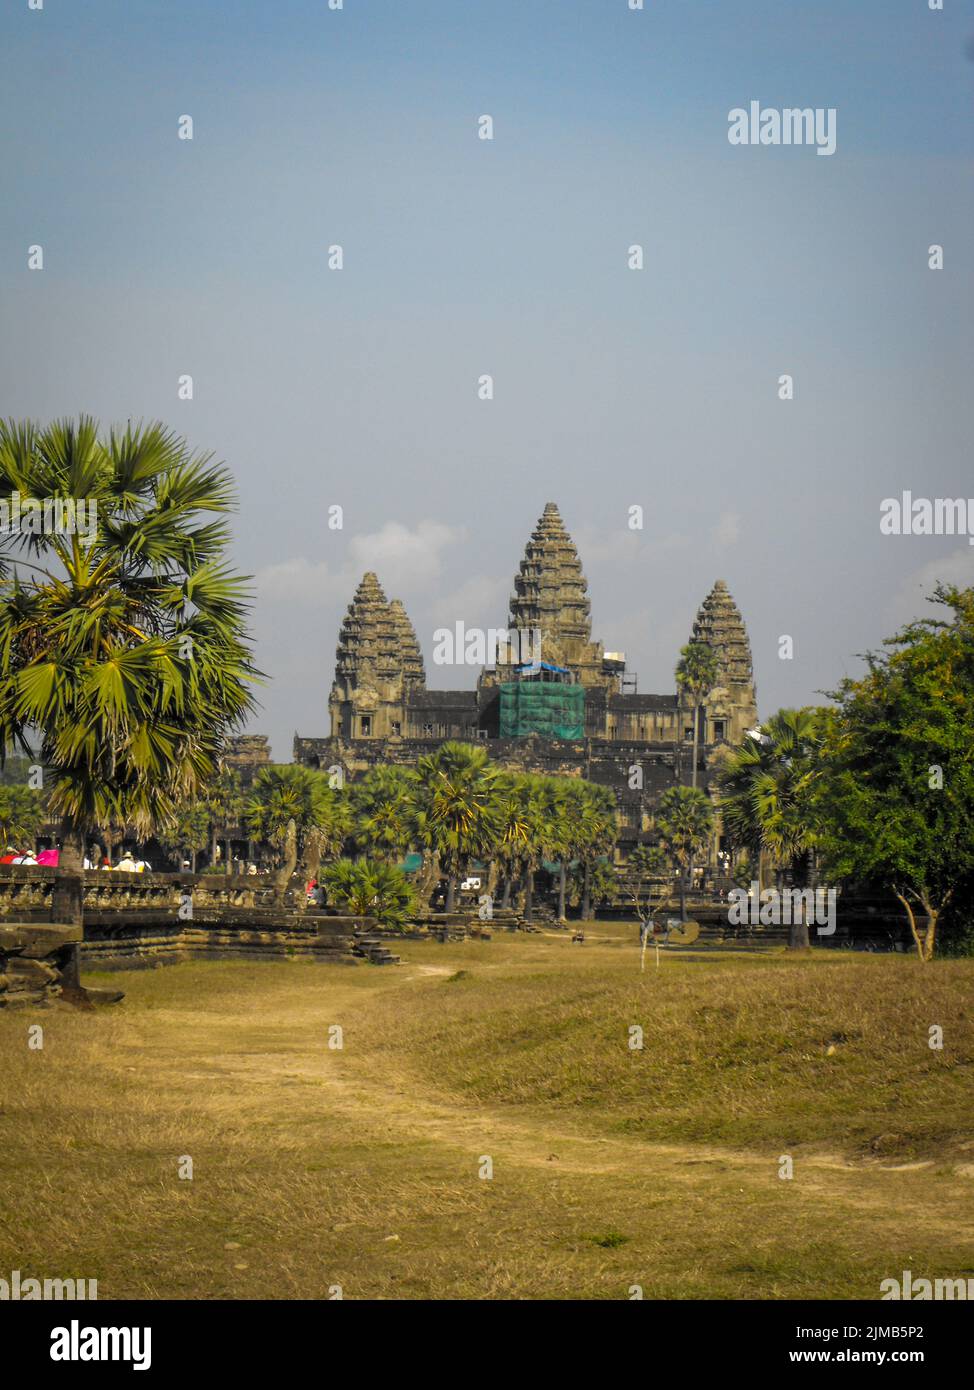 A vertical shot of a Angkor Wat Temple in Siam Reap, Cambodi Stock Photo